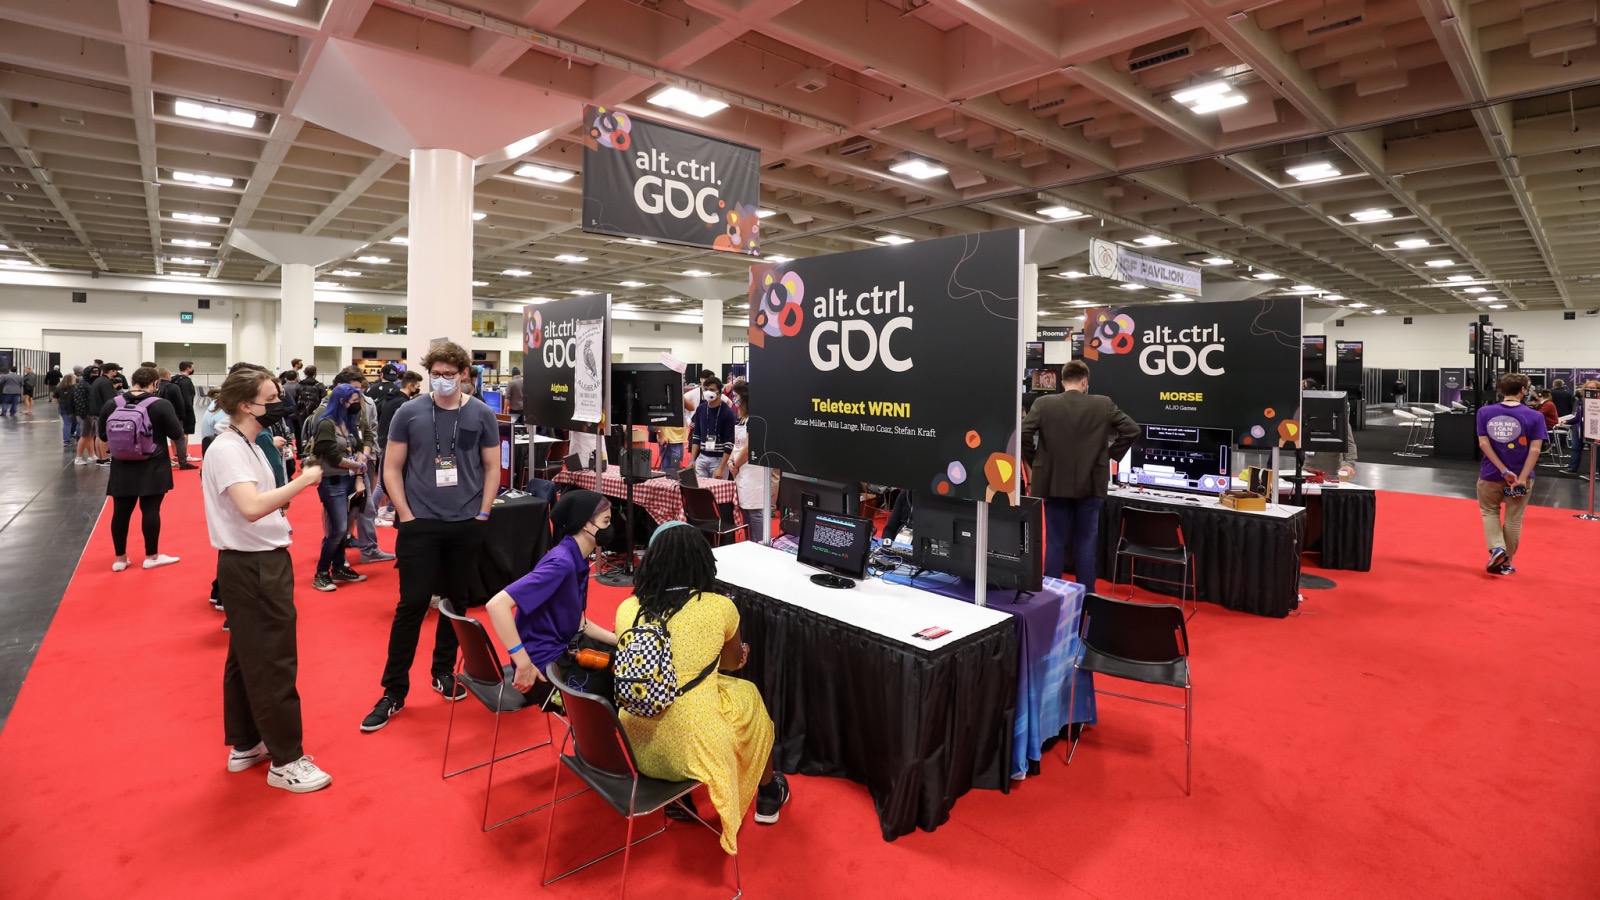 Here Are the Outstanding Games Coming to alt.ctrl.GDC at GDC 2023